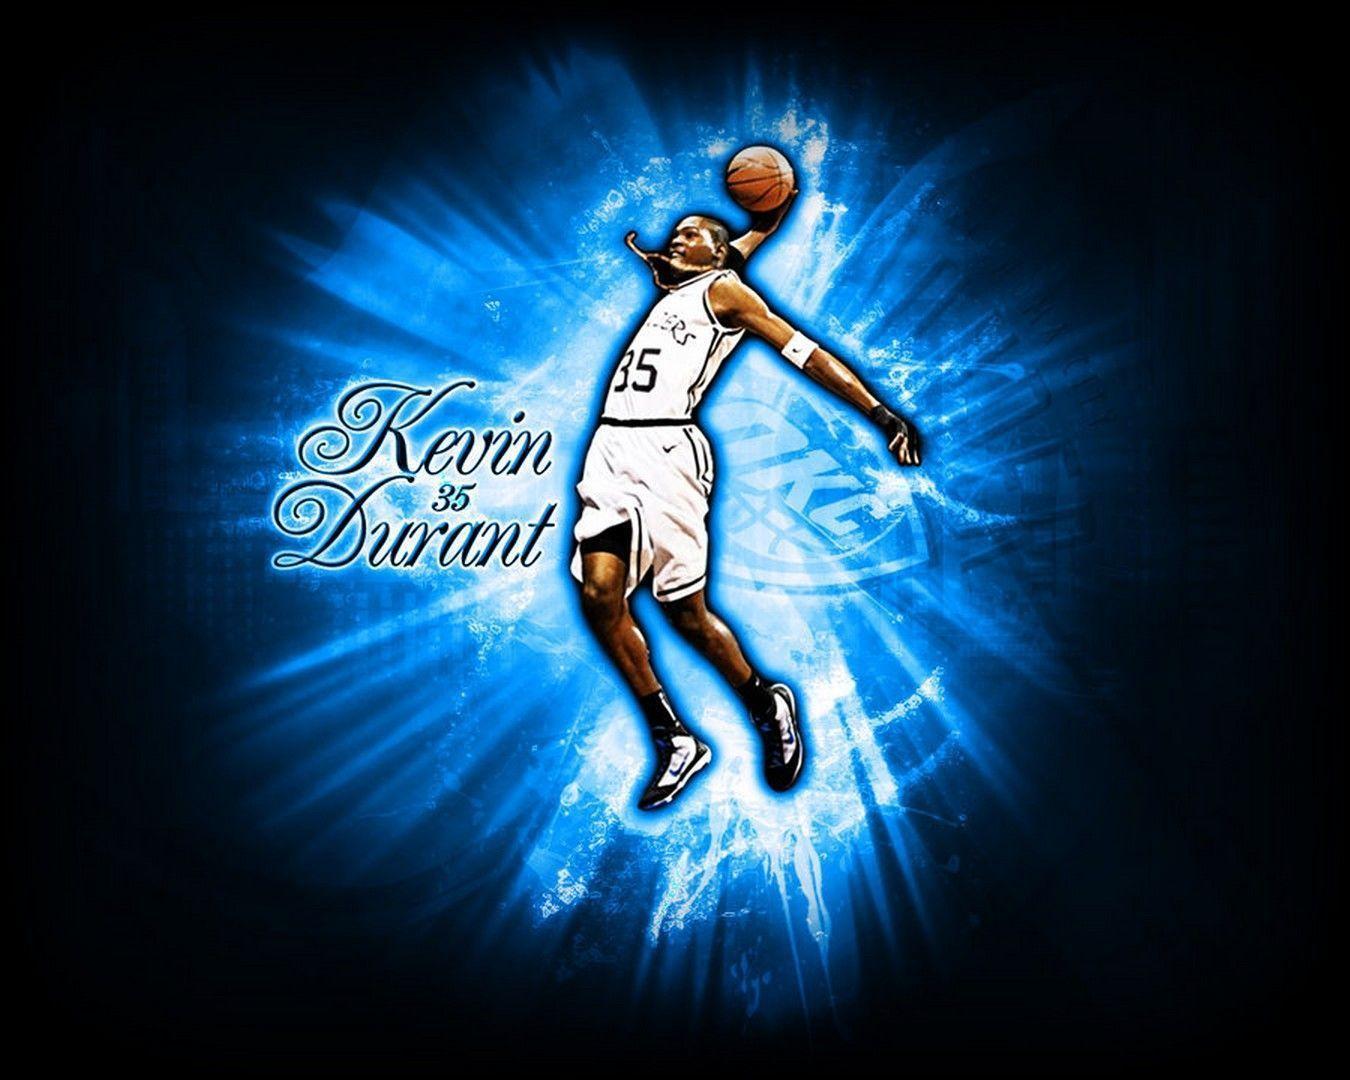 Kevin Durant Background 1 HD Wallpaper. lzamgs